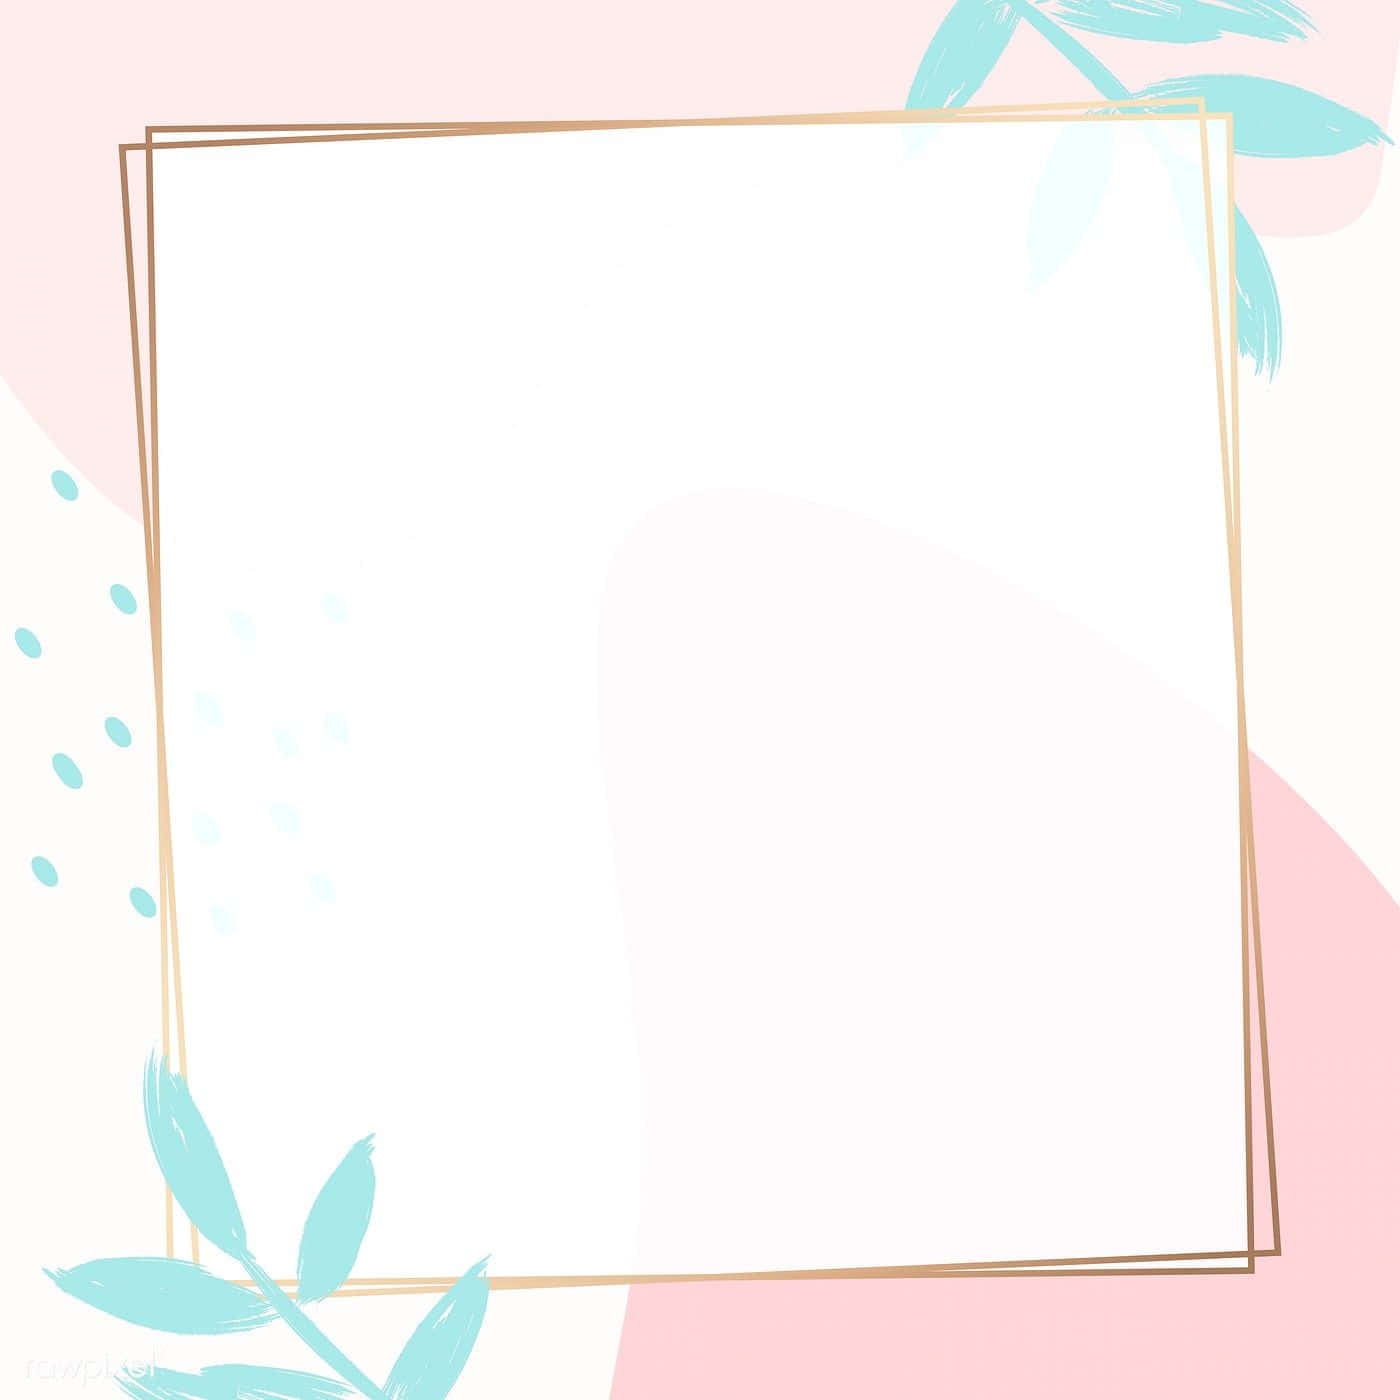 A Pink And Blue Background With A Frame And Leaves